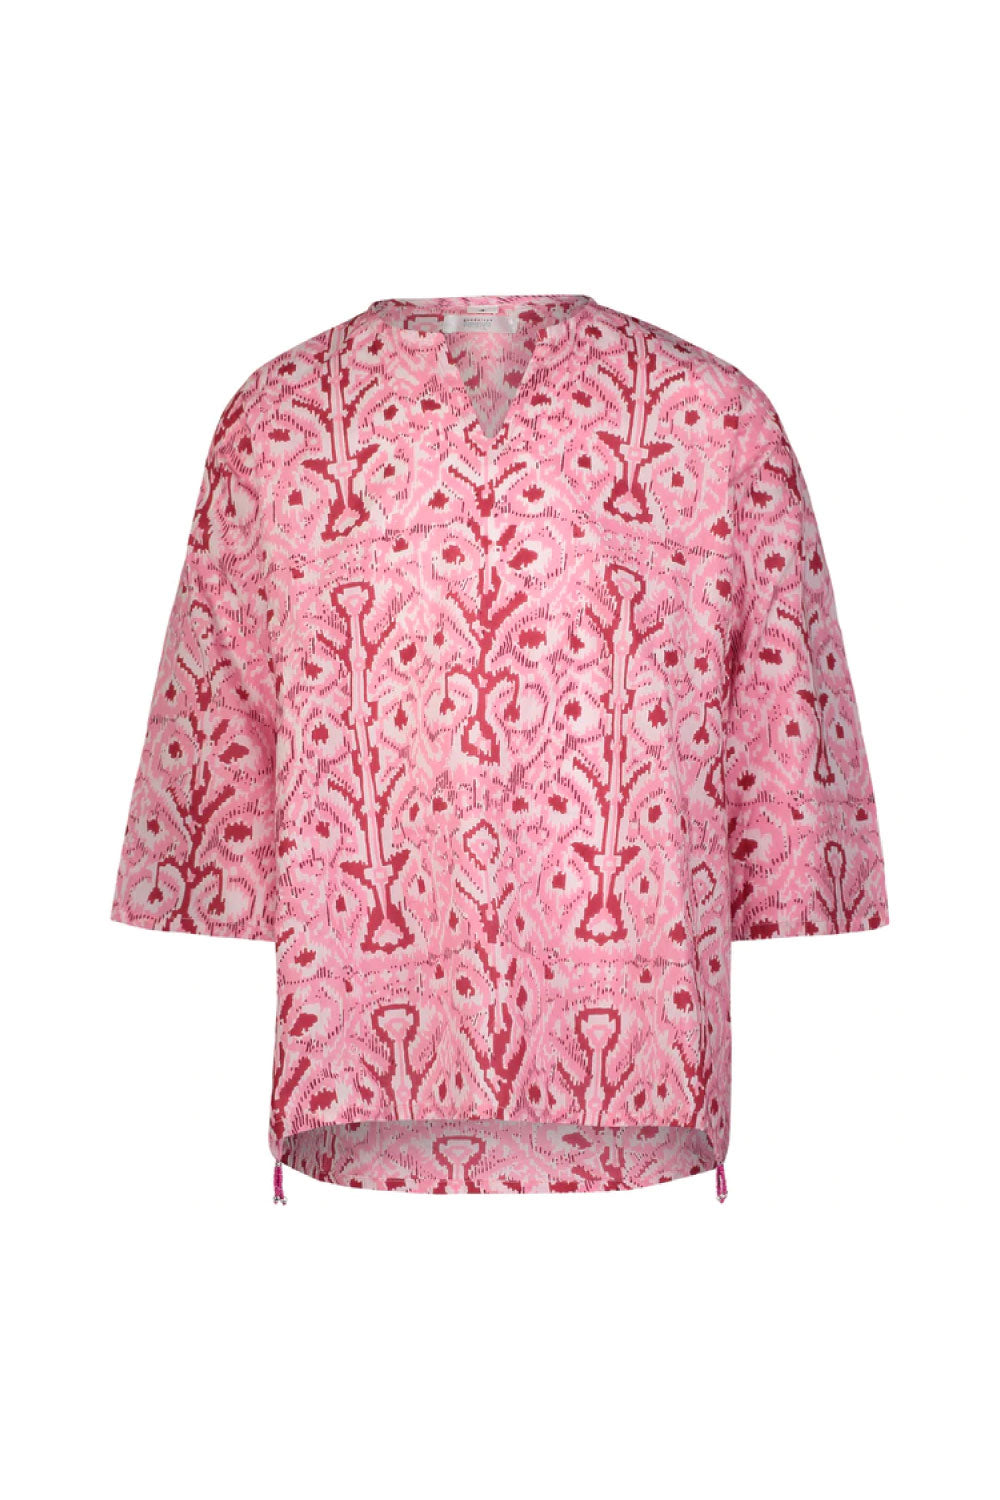 Image of the front of the Viscaya Tunic in Pink.